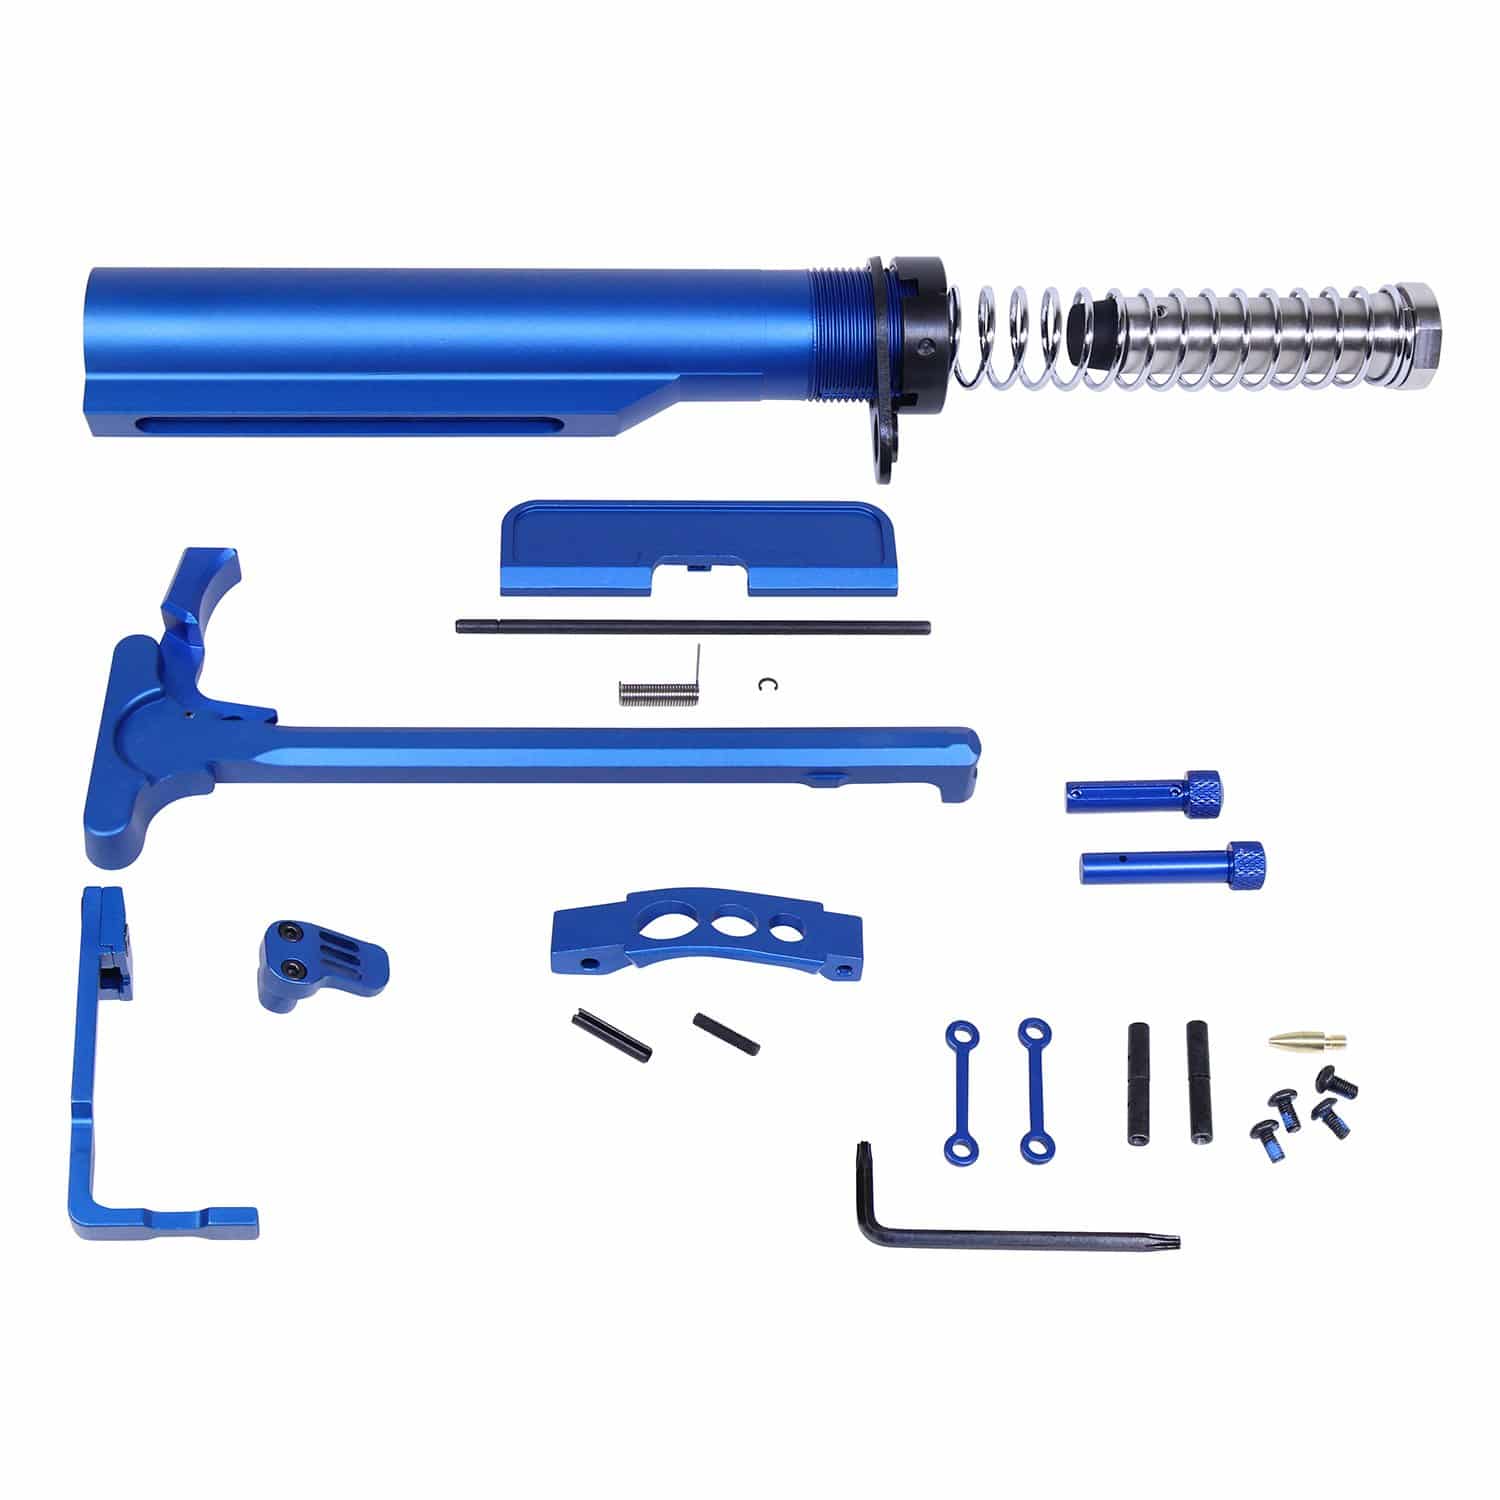 AR-15 Complete Accessory Kit in Anodized Blue